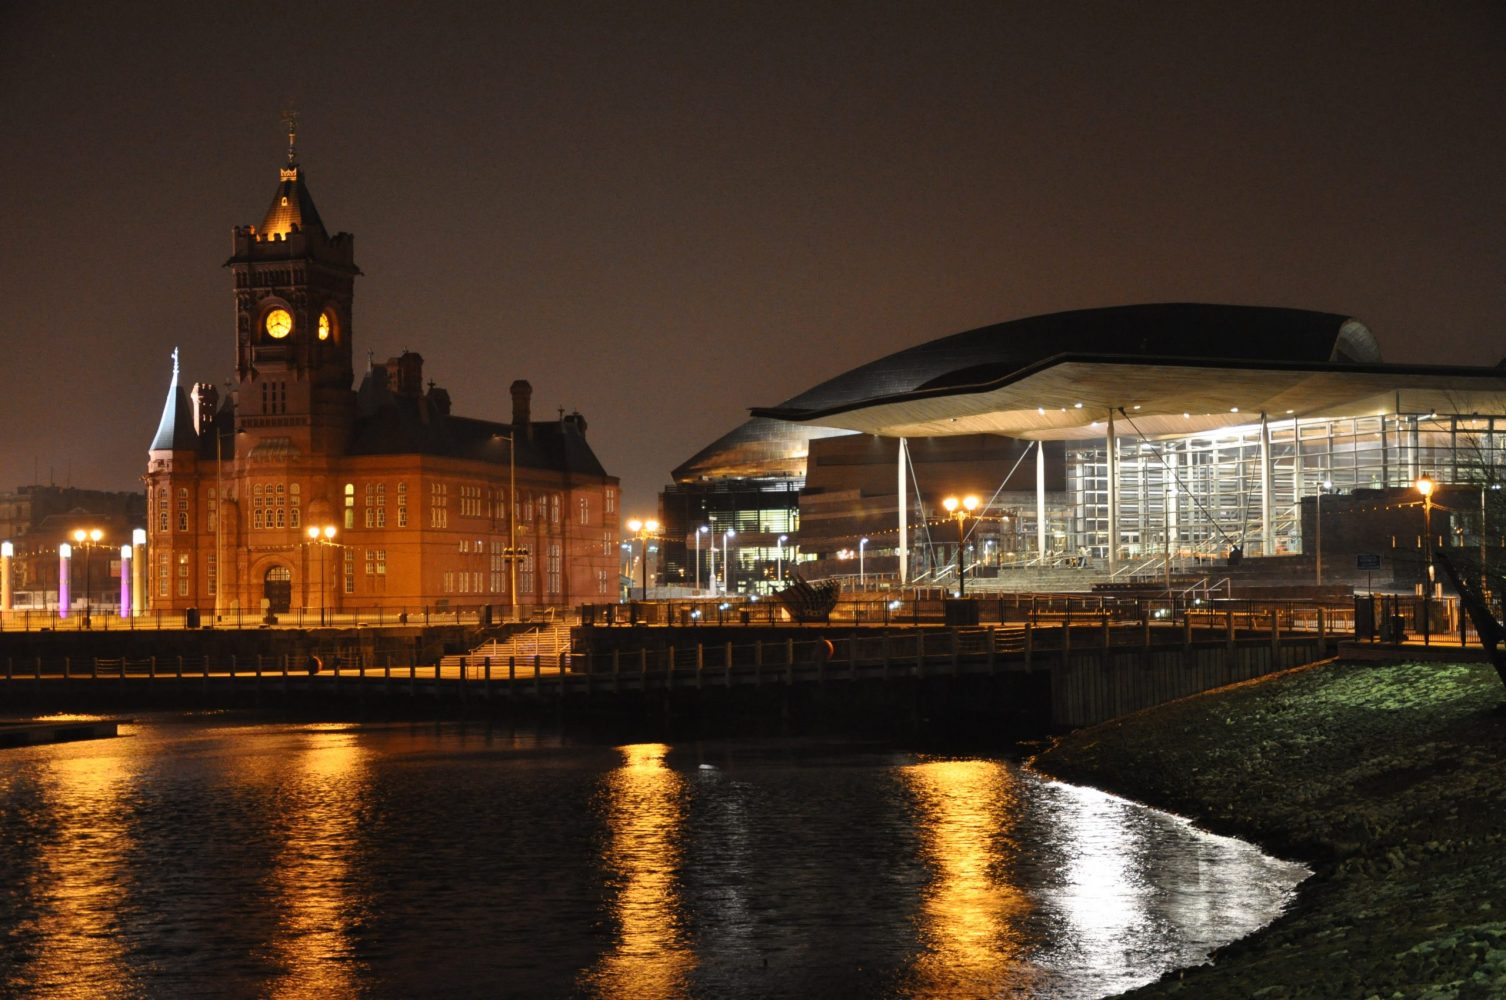 A picture of the Senedd and Pierhead at night. Author: Rtadams / License: https://creativecommons.org/licenses/by-sa/2.0/